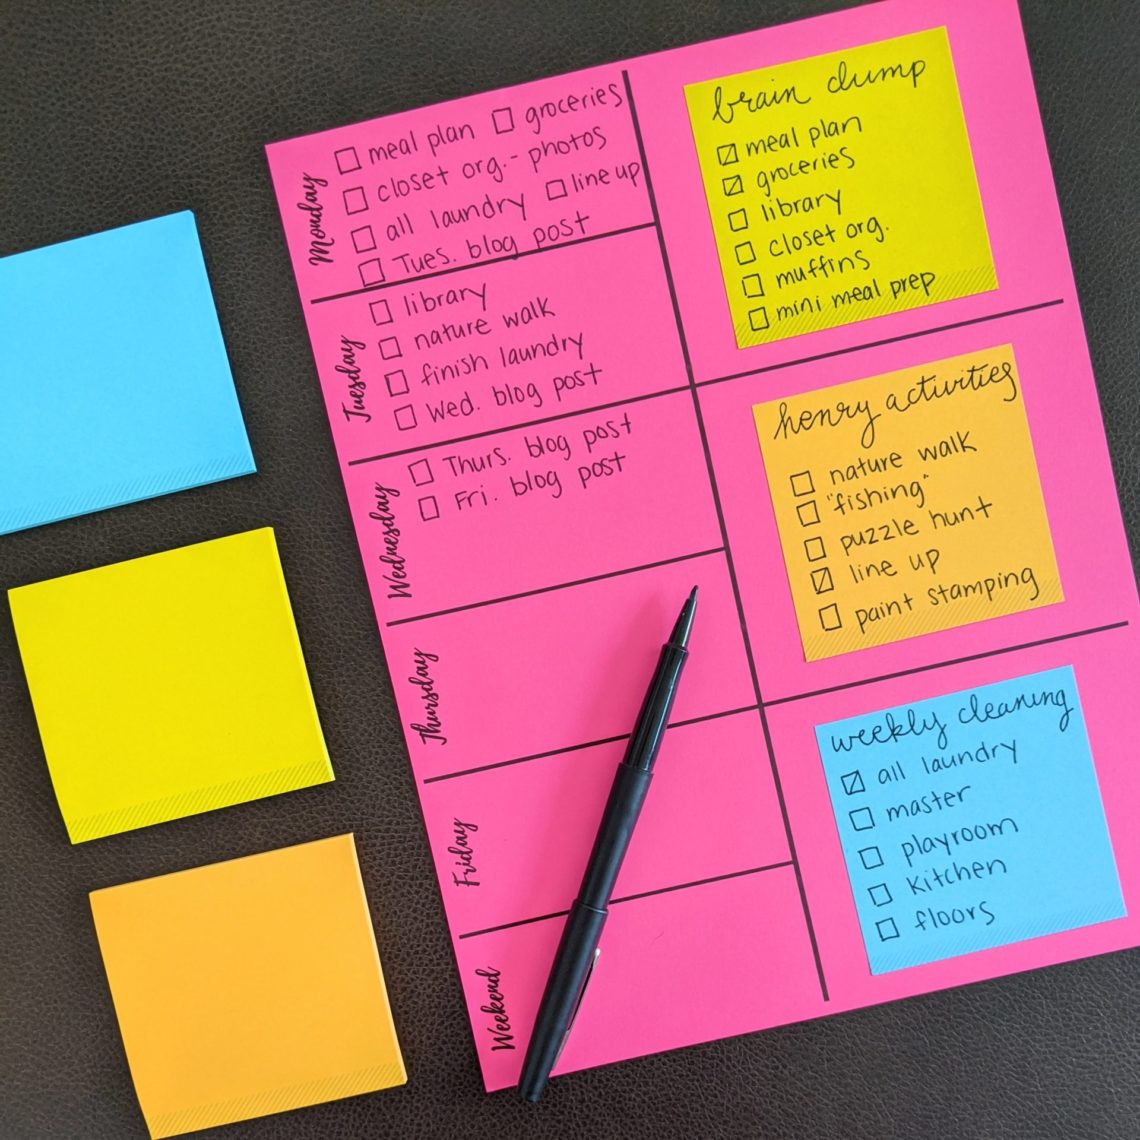 Sticky Note Brain Dump Printable – Let's Live and Learn